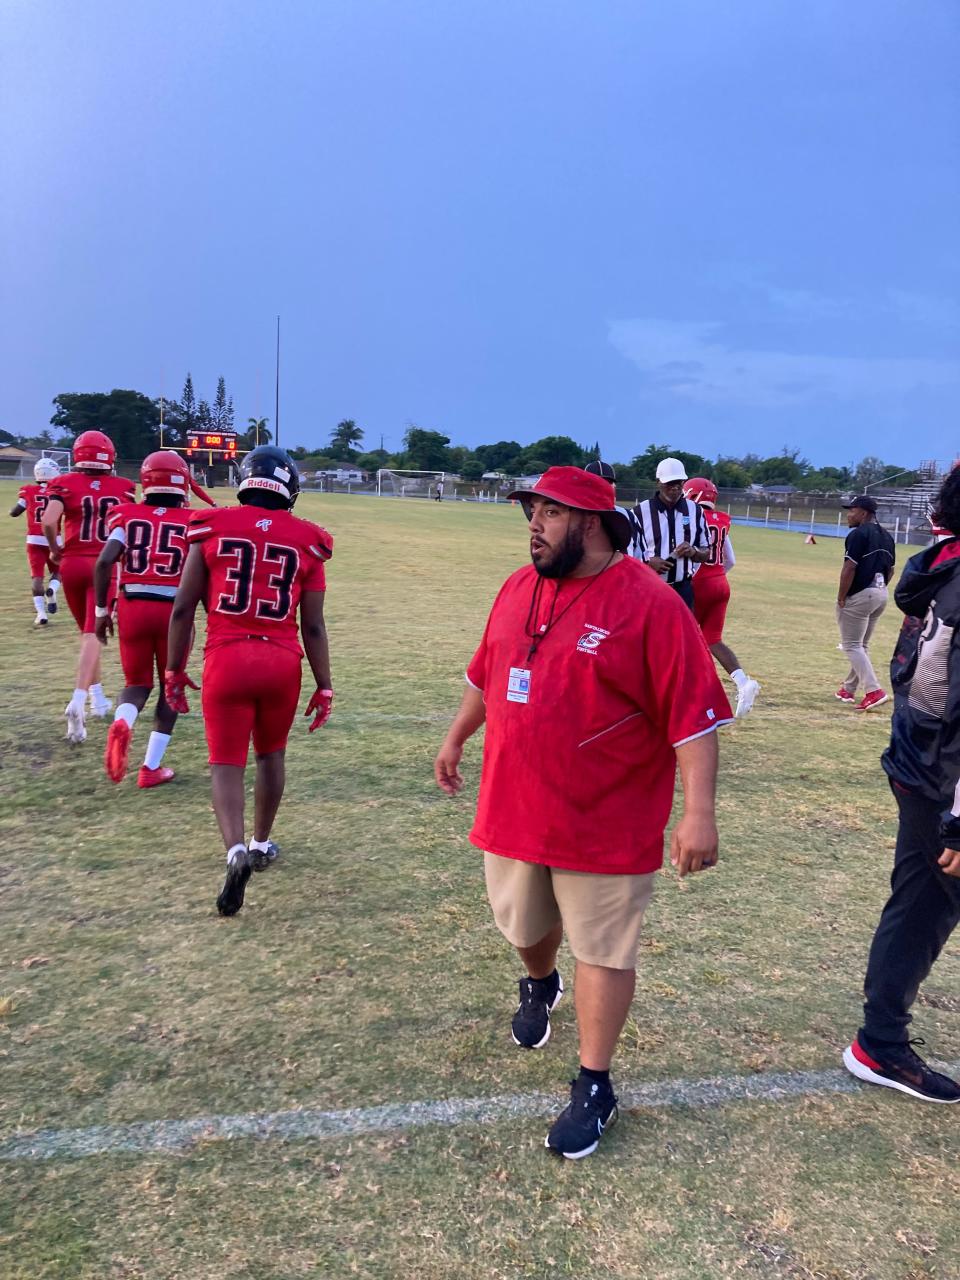 Santaluces head coach Hector Clavijo prepares his team to play against South Broward in spring football competition on Thursday in Lantana.